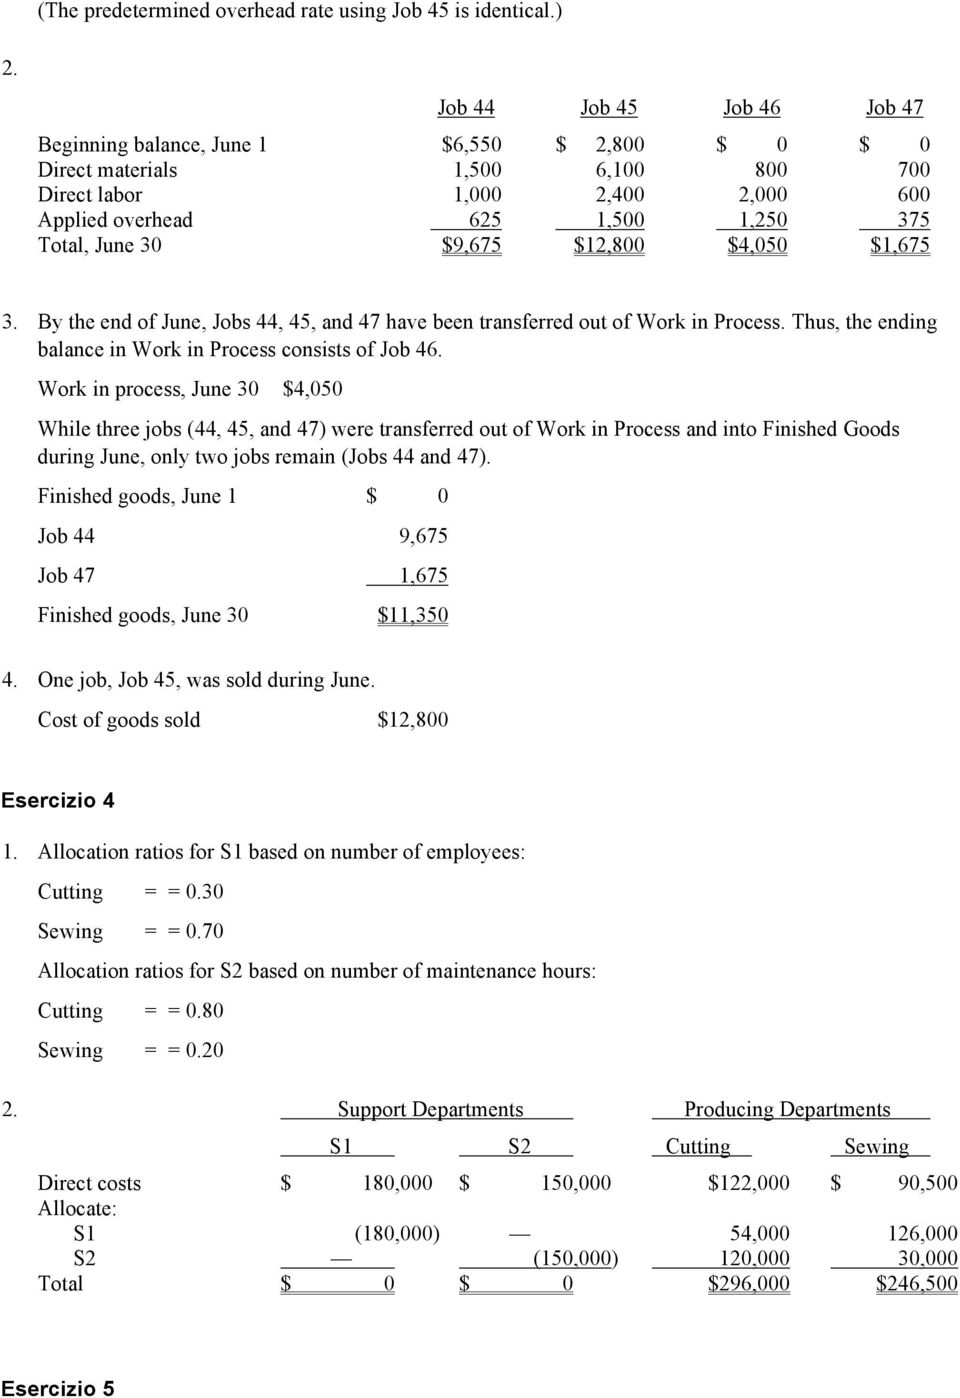 30 $9,675 $12,800 $4,050 $1,675 3. By the end of June, Jobs 44, 45, and 47 have been transferred out of Work in Process. Thus, the ending balance in Work in Process consists of Job 46.